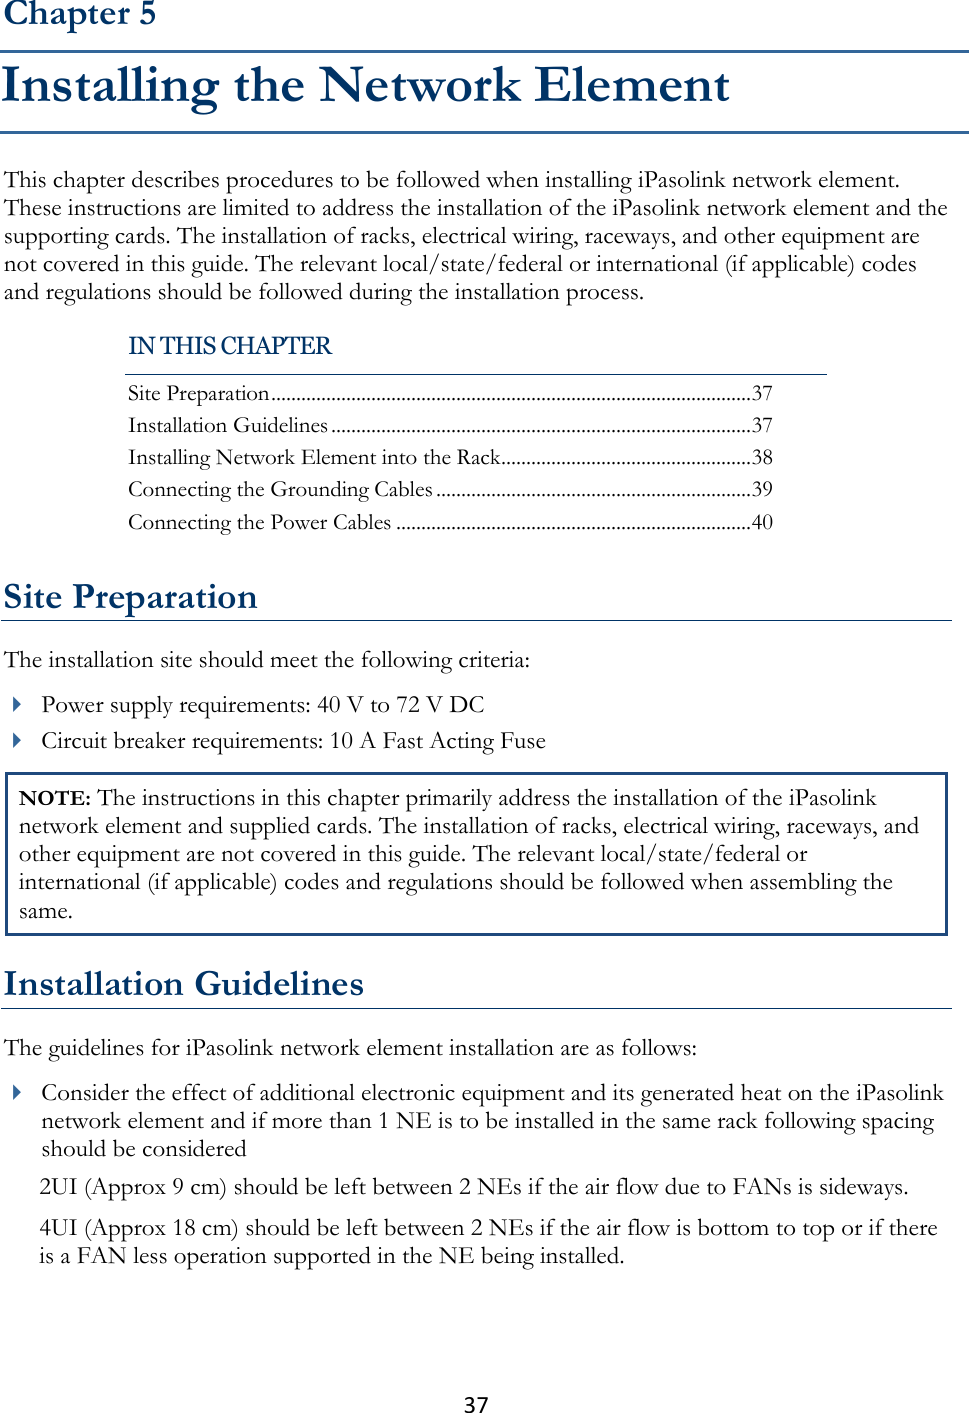 37  This chapter describes procedures to be followed when installing iPasolink network element. These instructions are limited to address the installation of the iPasolink network element and the supporting cards. The installation of racks, electrical wiring, raceways, and other equipment are not covered in this guide. The relevant local/state/federal or international (if applicable) codes and regulations should be followed during the installation process.   Site Preparation The installation site should meet the following criteria:  Power supply requirements: 40 V to 72 V DC  Circuit breaker requirements: 10 A Fast Acting Fuse NOTE: The instructions in this chapter primarily address the installation of the iPasolink network element and supplied cards. The installation of racks, electrical wiring, raceways, and other equipment are not covered in this guide. The relevant local/state/federal or international (if applicable) codes and regulations should be followed when assembling the same.  Installation Guidelines The guidelines for iPasolink network element installation are as follows:  Consider the effect of additional electronic equipment and its generated heat on the iPasolink network element and if more than 1 NE is to be installed in the same rack following spacing should be considered 2UI (Approx 9 cm) should be left between 2 NEs if the air flow due to FANs is sideways.  4UI (Approx 18 cm) should be left between 2 NEs if the air flow is bottom to top or if there is a FAN less operation supported in the NE being installed.  Chapter 5 Installing the Network Element IN THIS CHAPTER Site Preparation ................................................................................................ 37 Installation Guidelines .................................................................................... 37 Installing Network Element into the Rack .................................................. 38 Connecting the Grounding Cables ............................................................... 39 Connecting the Power Cables ....................................................................... 40 